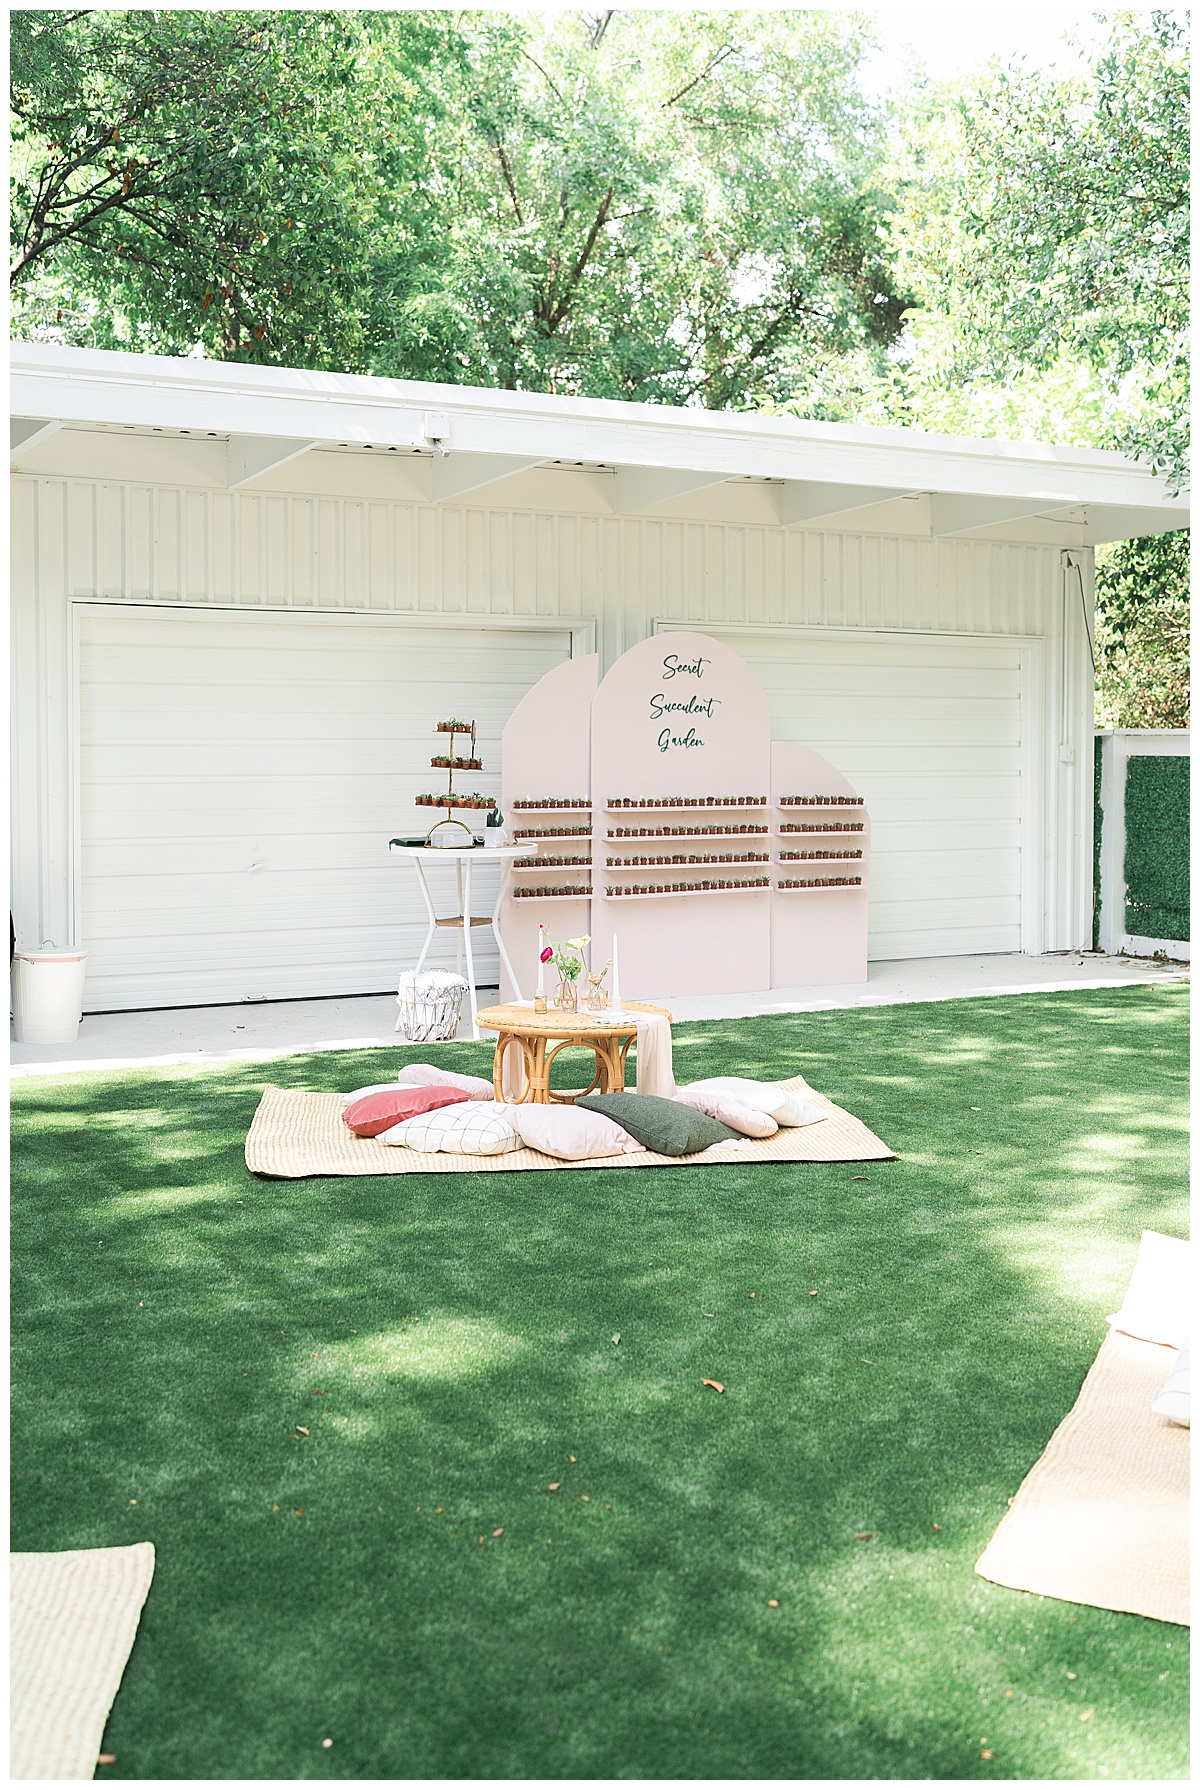 Outdoor picnic with seating chat for the Open House at The Juliana